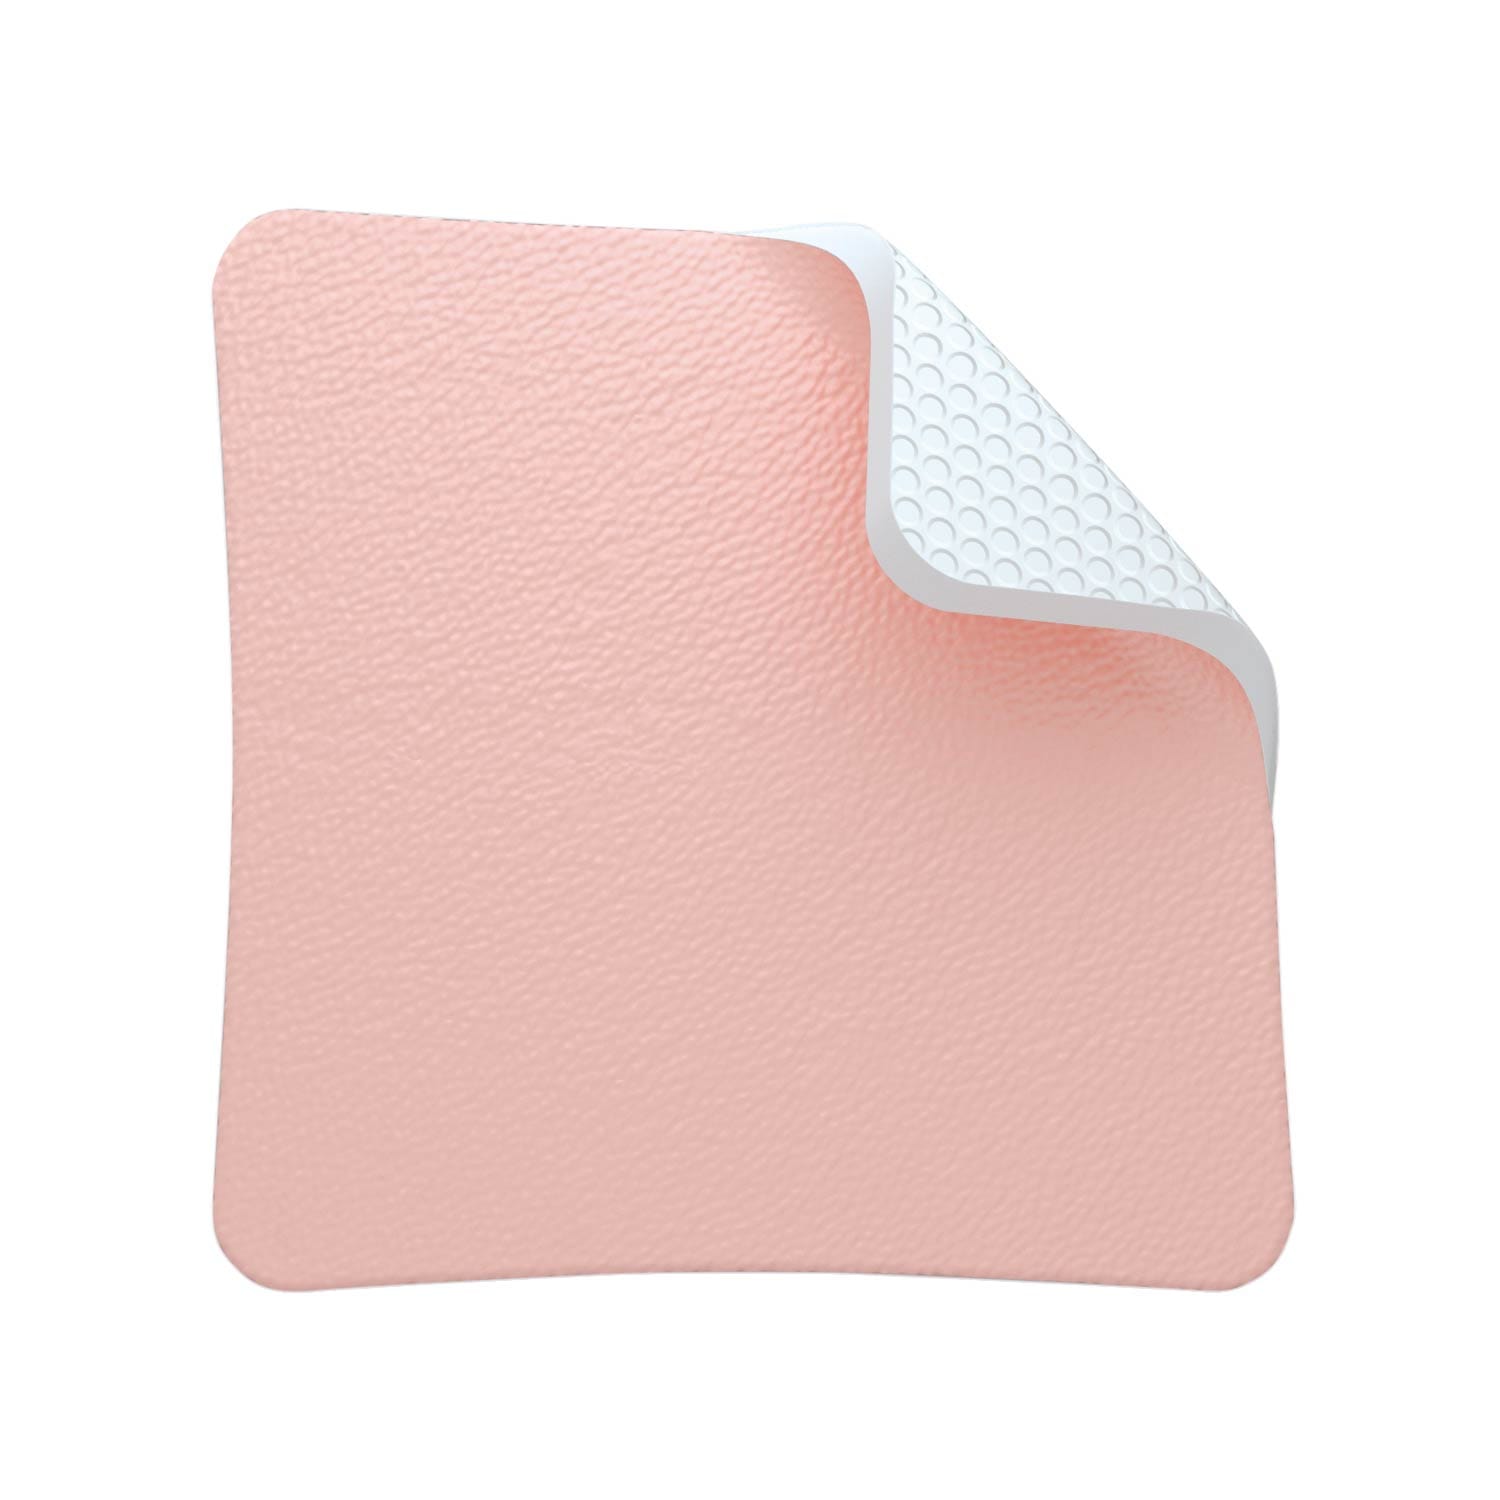 Allevyn™ Gentle Foam Dressing For Acute And Chronic Wounds